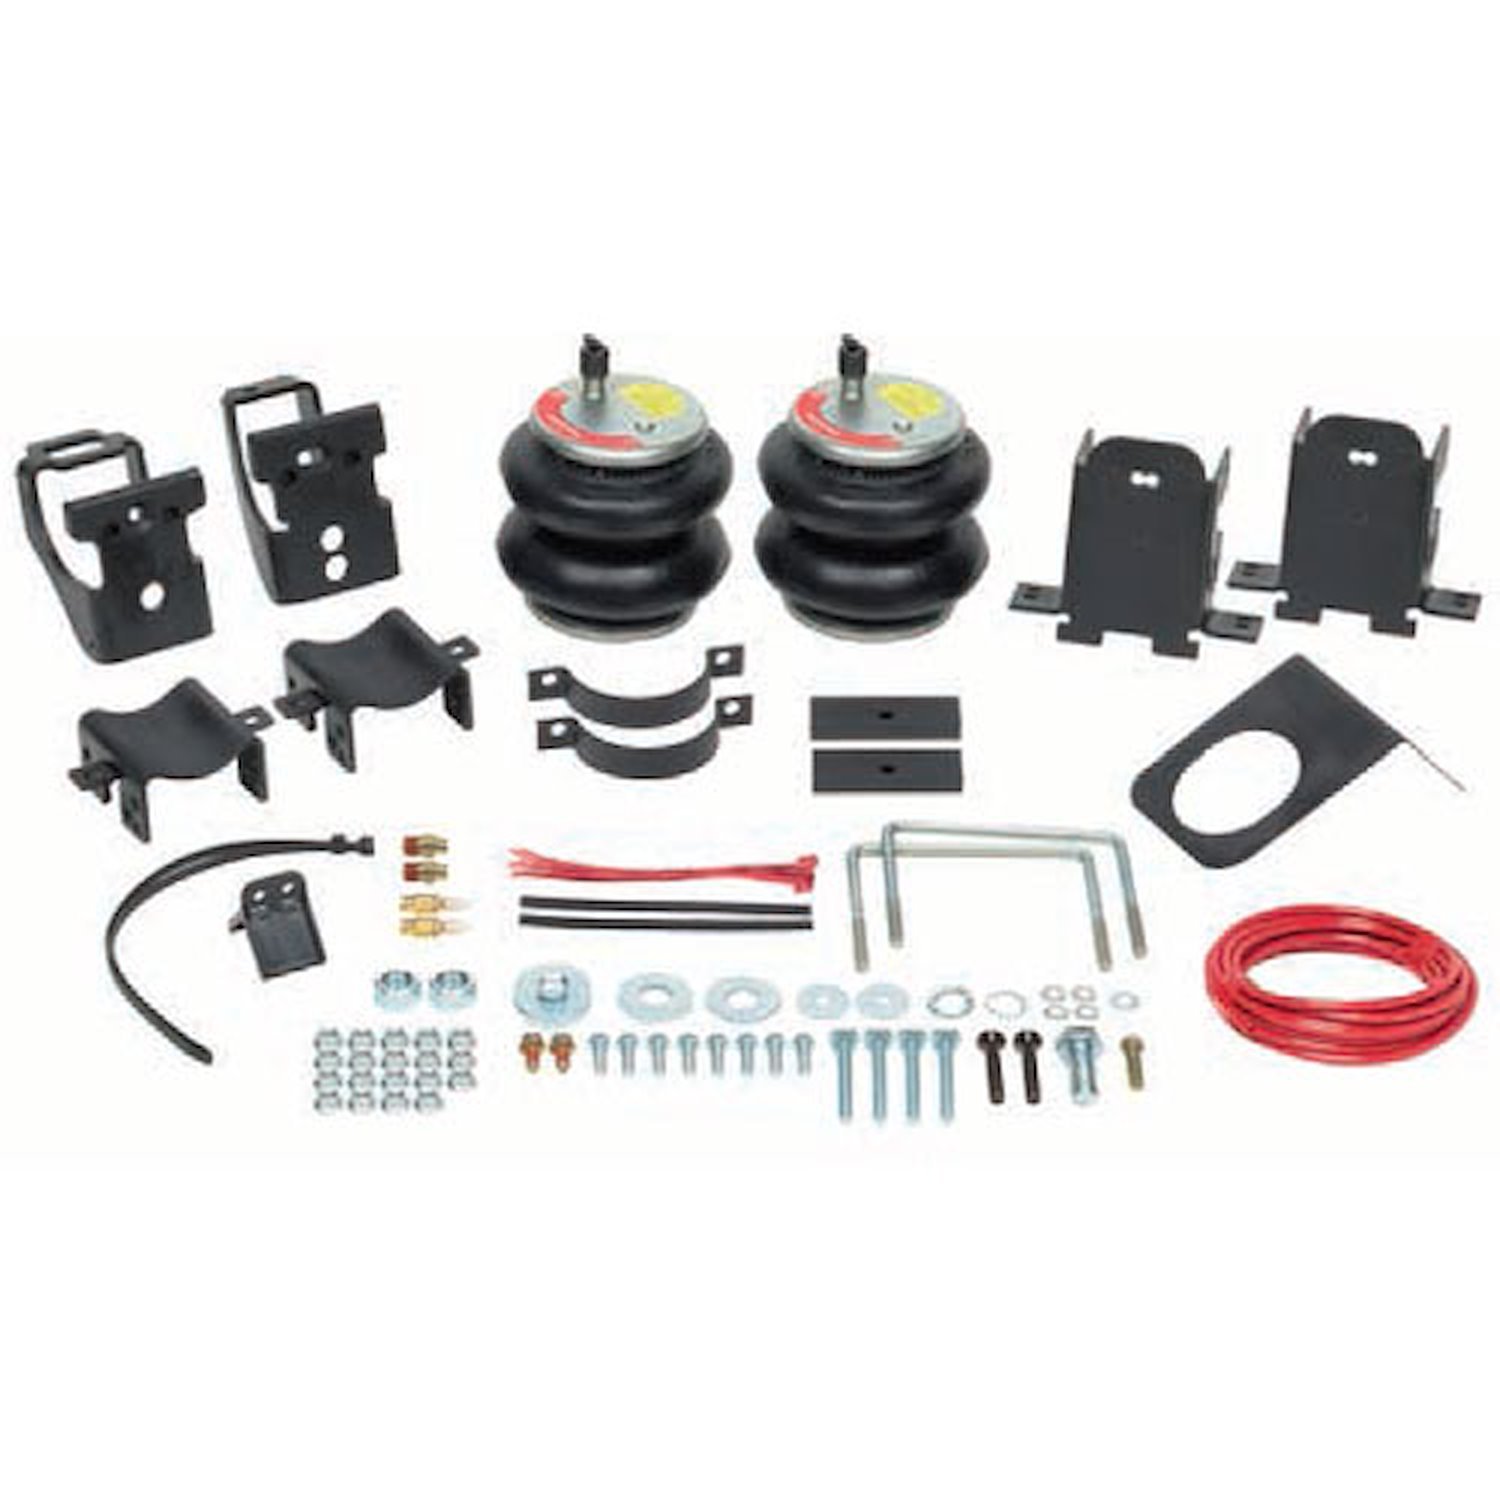 Ride-Rite Extreme Duty Air Spring Kit 2013-16 Dodge Ram 3500 4WD